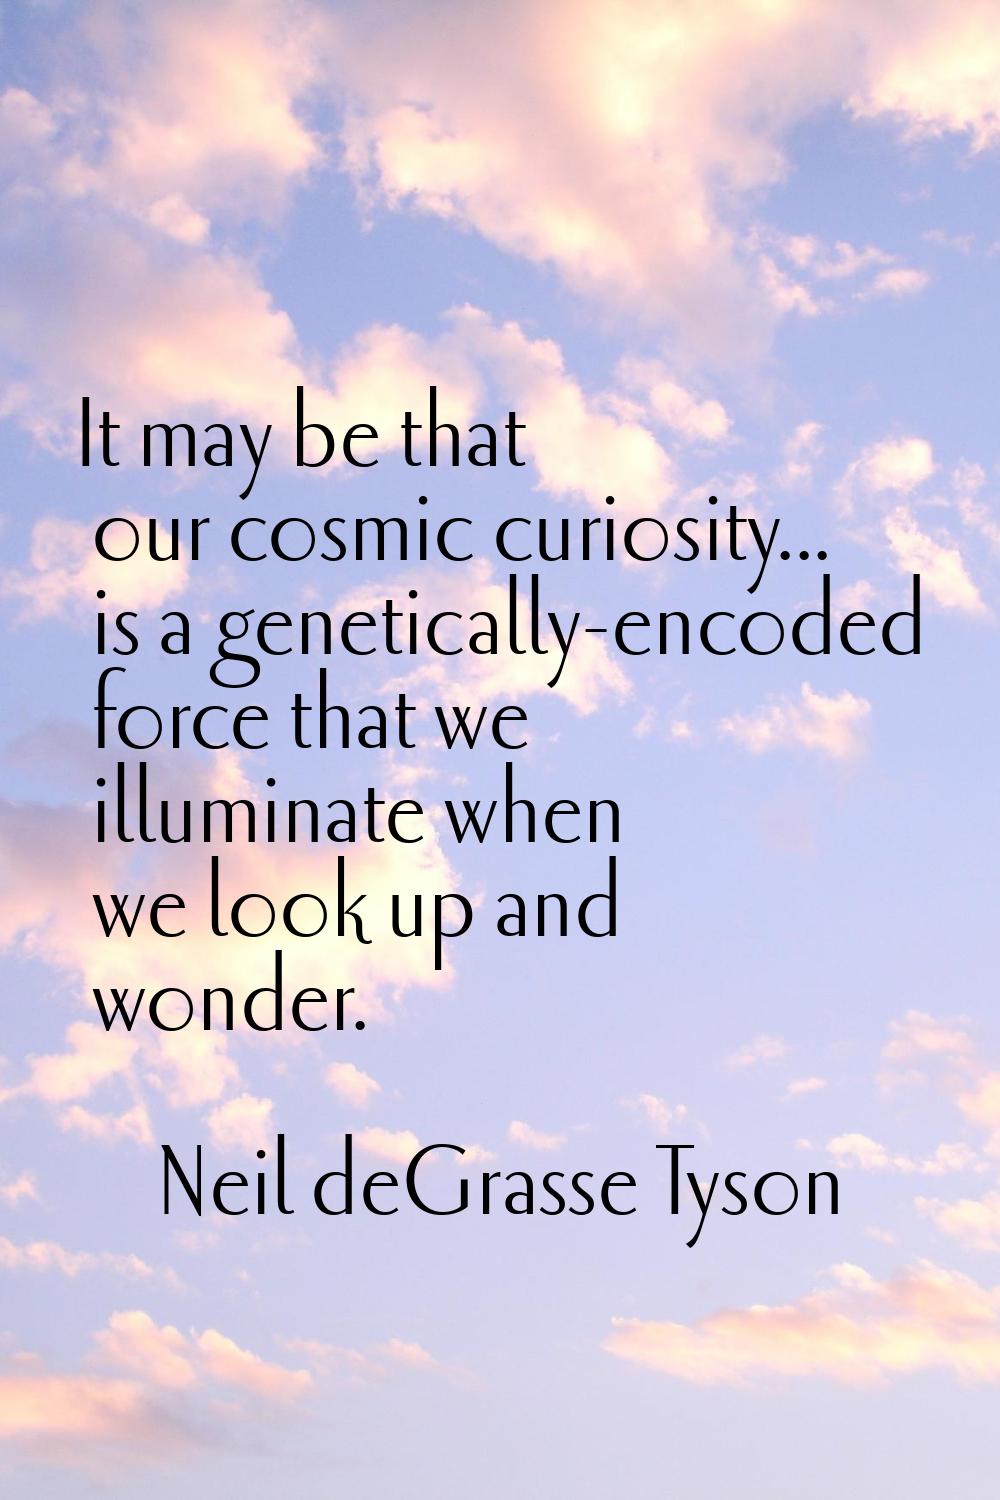 It may be that our cosmic curiosity... is a genetically-encoded force that we illuminate when we lo